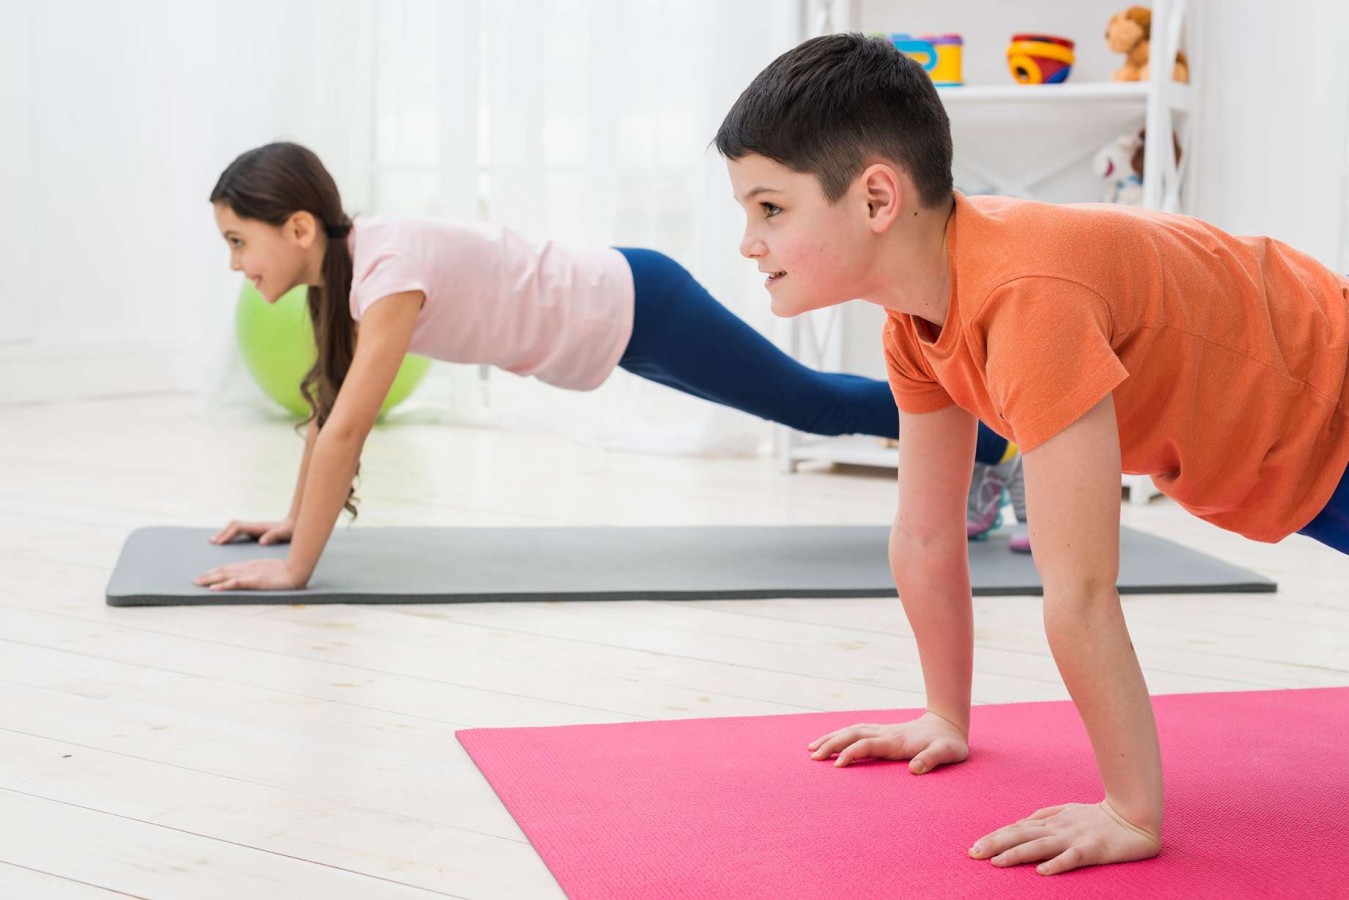  Parents, Encourage Your Kids to Try This Full-Body Workout